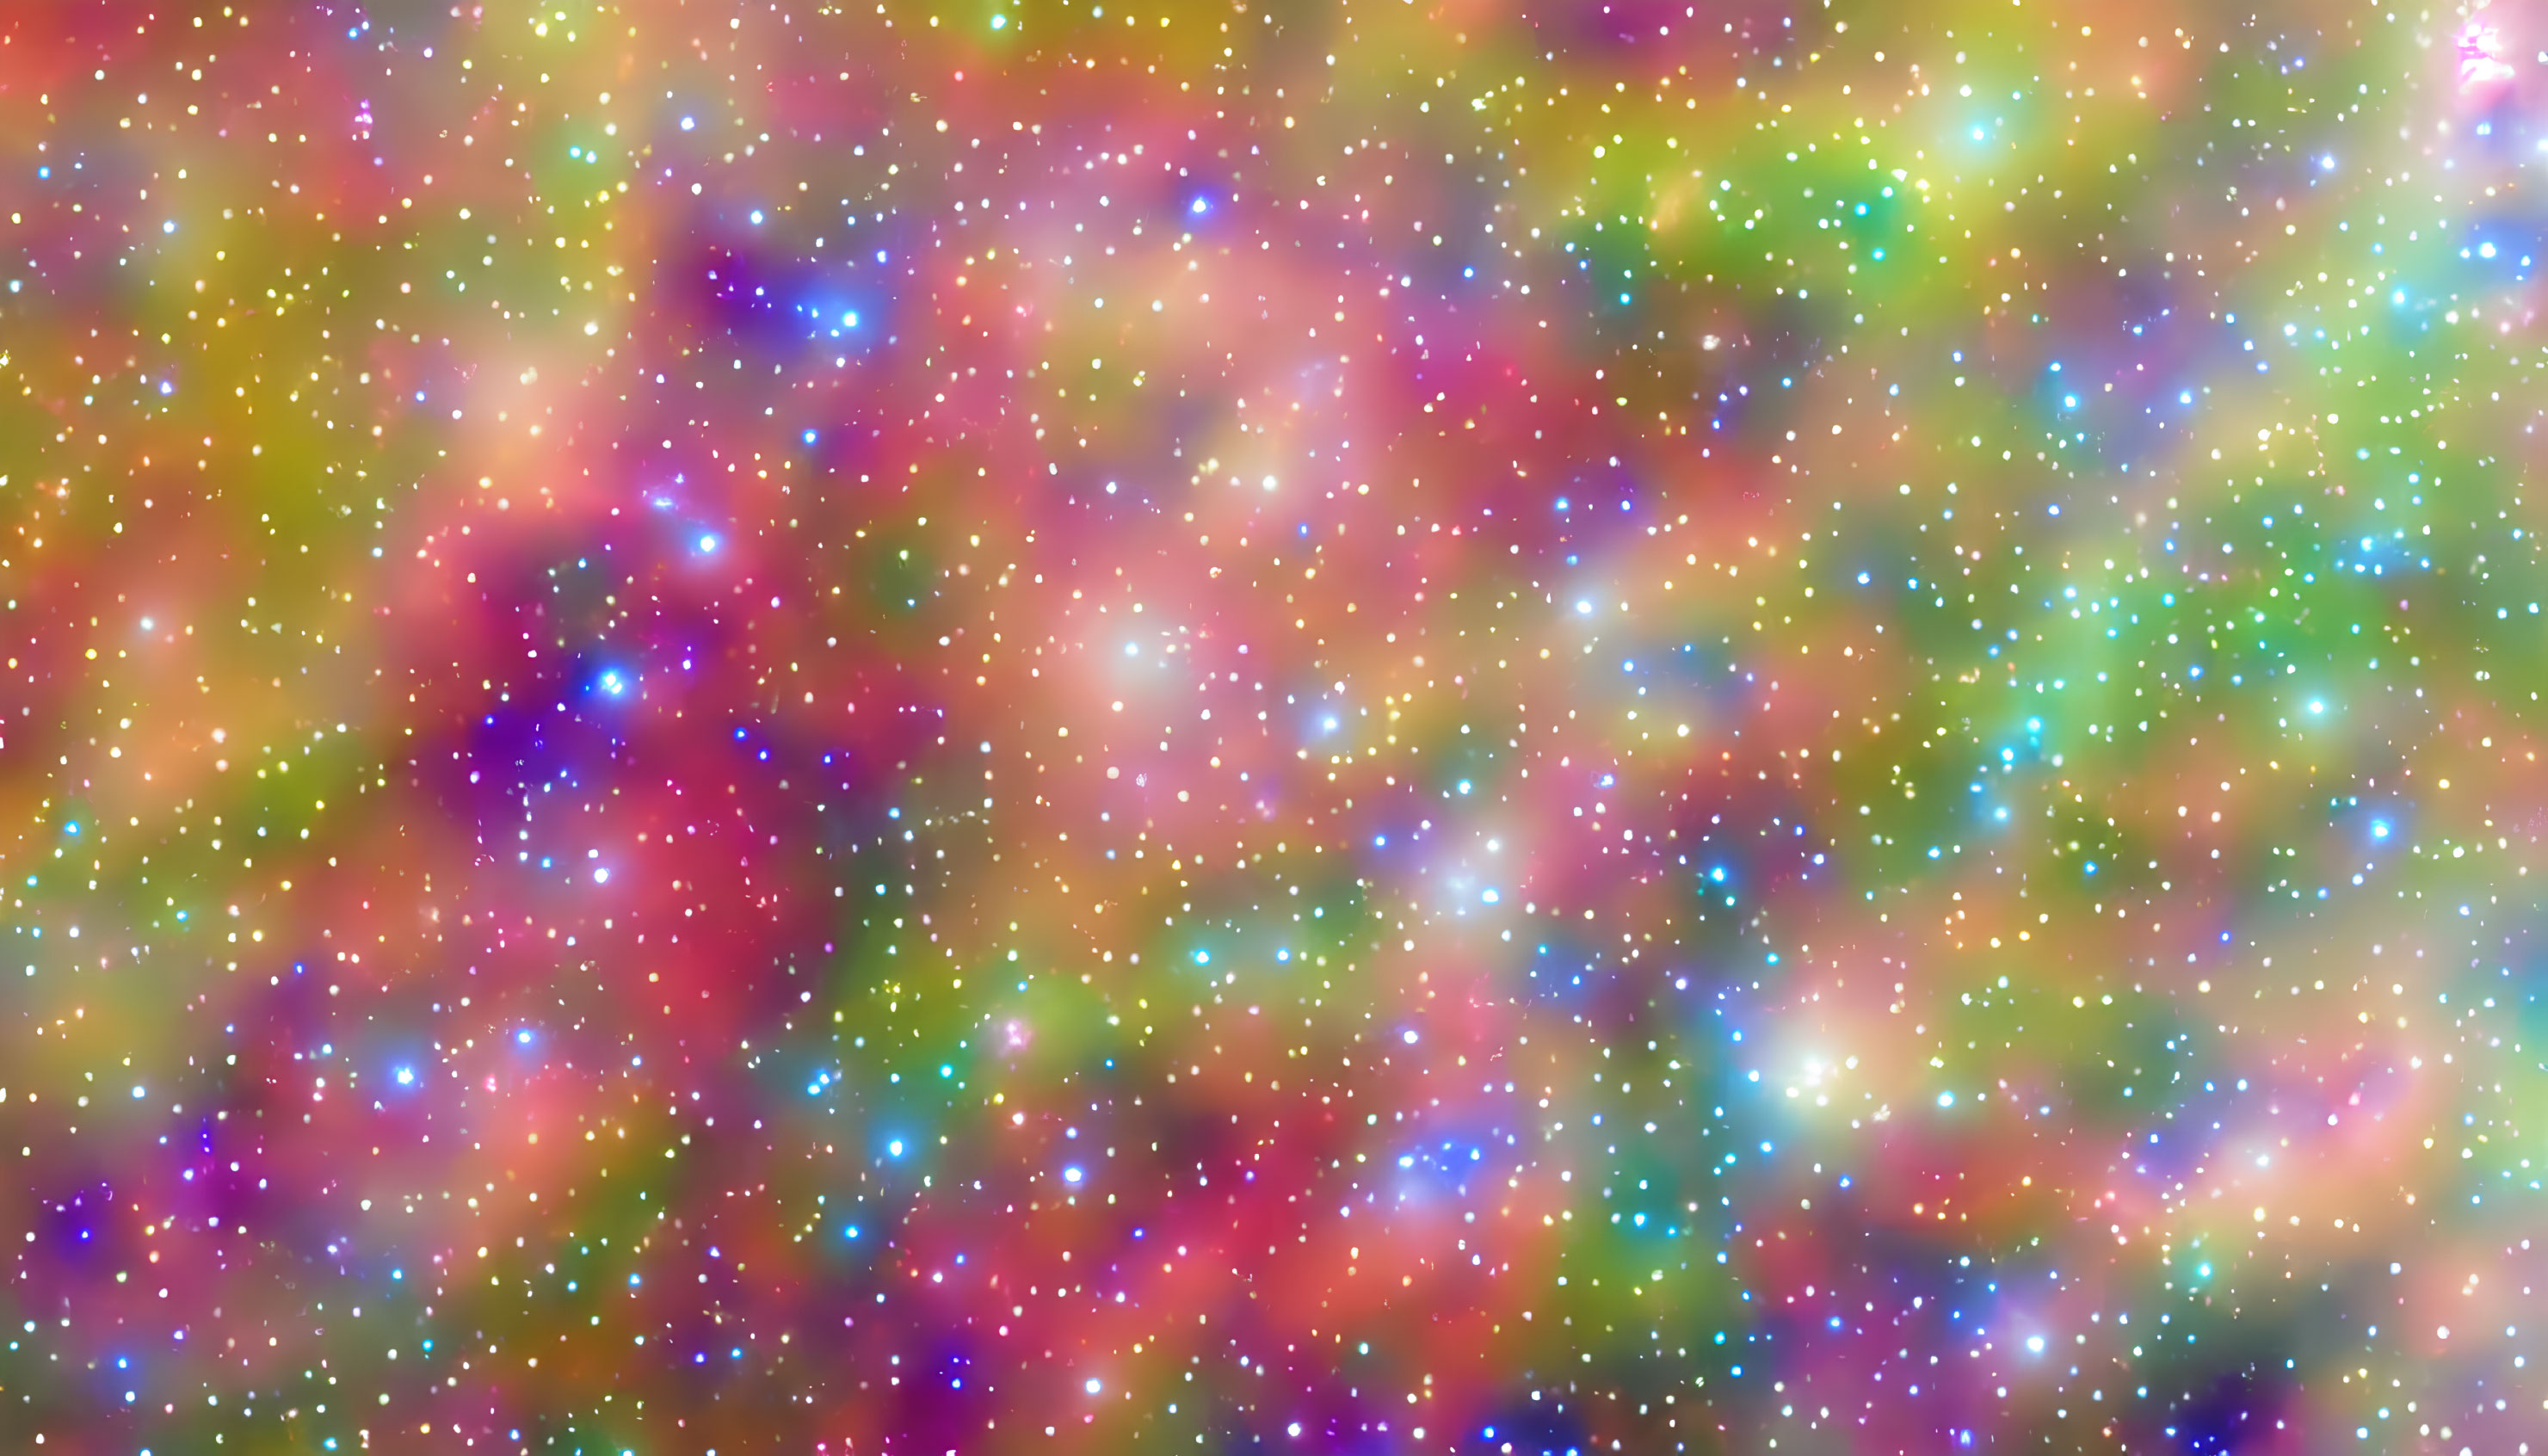 Multicolored space nebula with stars in pink, blue, green, and yellow